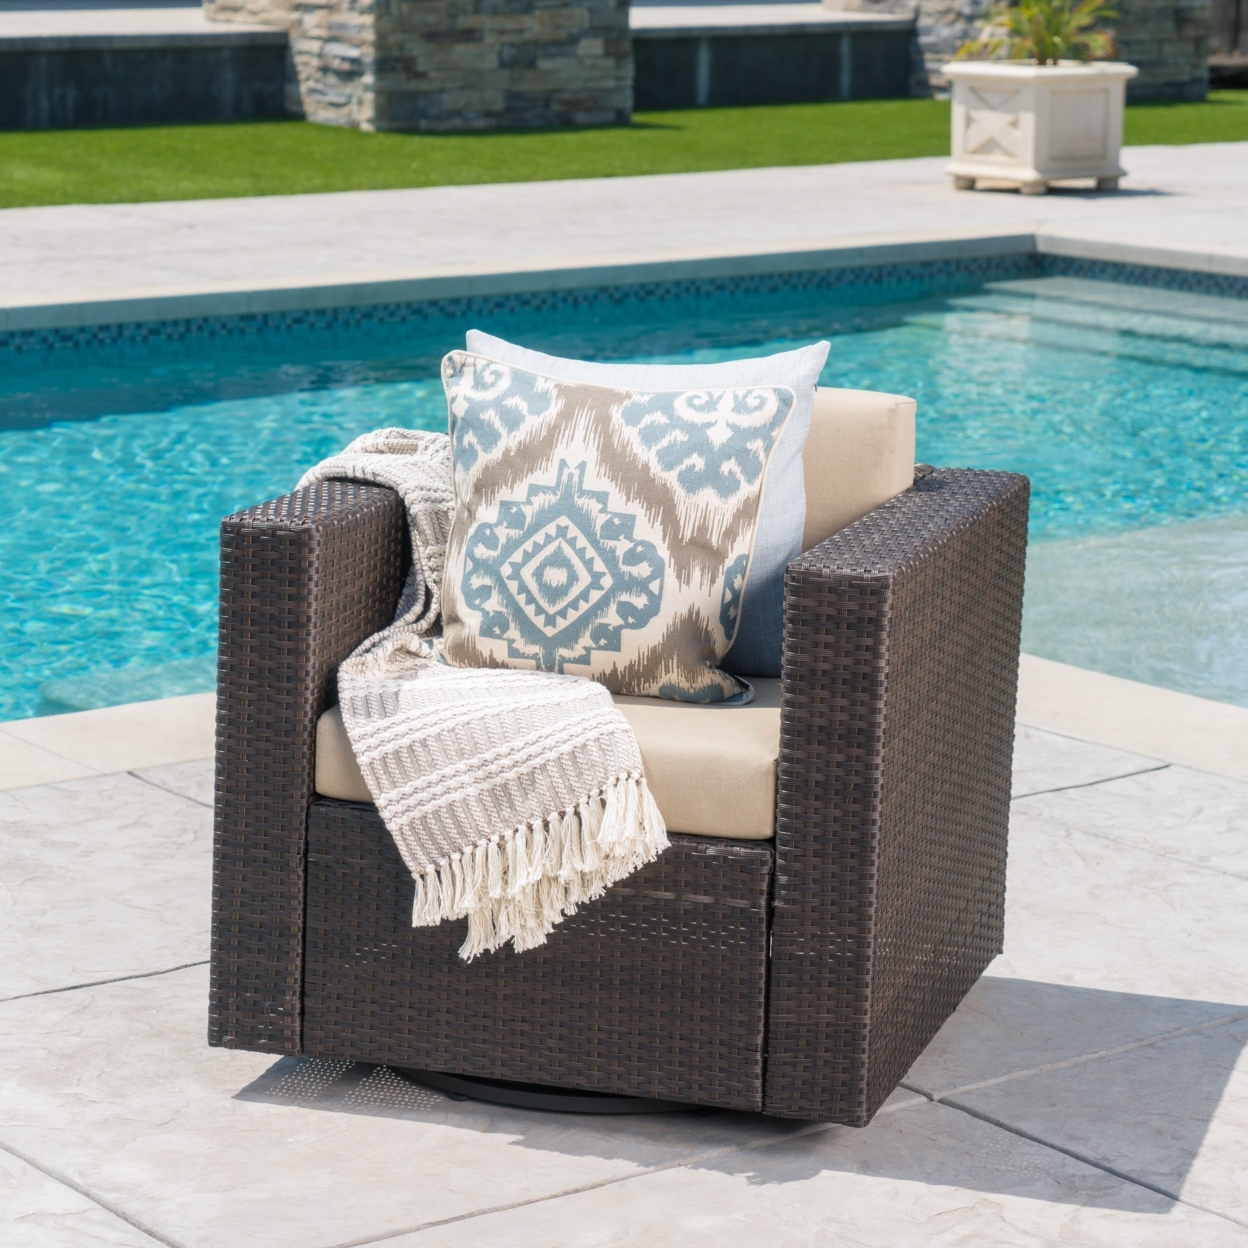 Venice Outdoor Wicker Swivel Club Chair With Water Resistant Cushions - Dark Brown/beige, Single